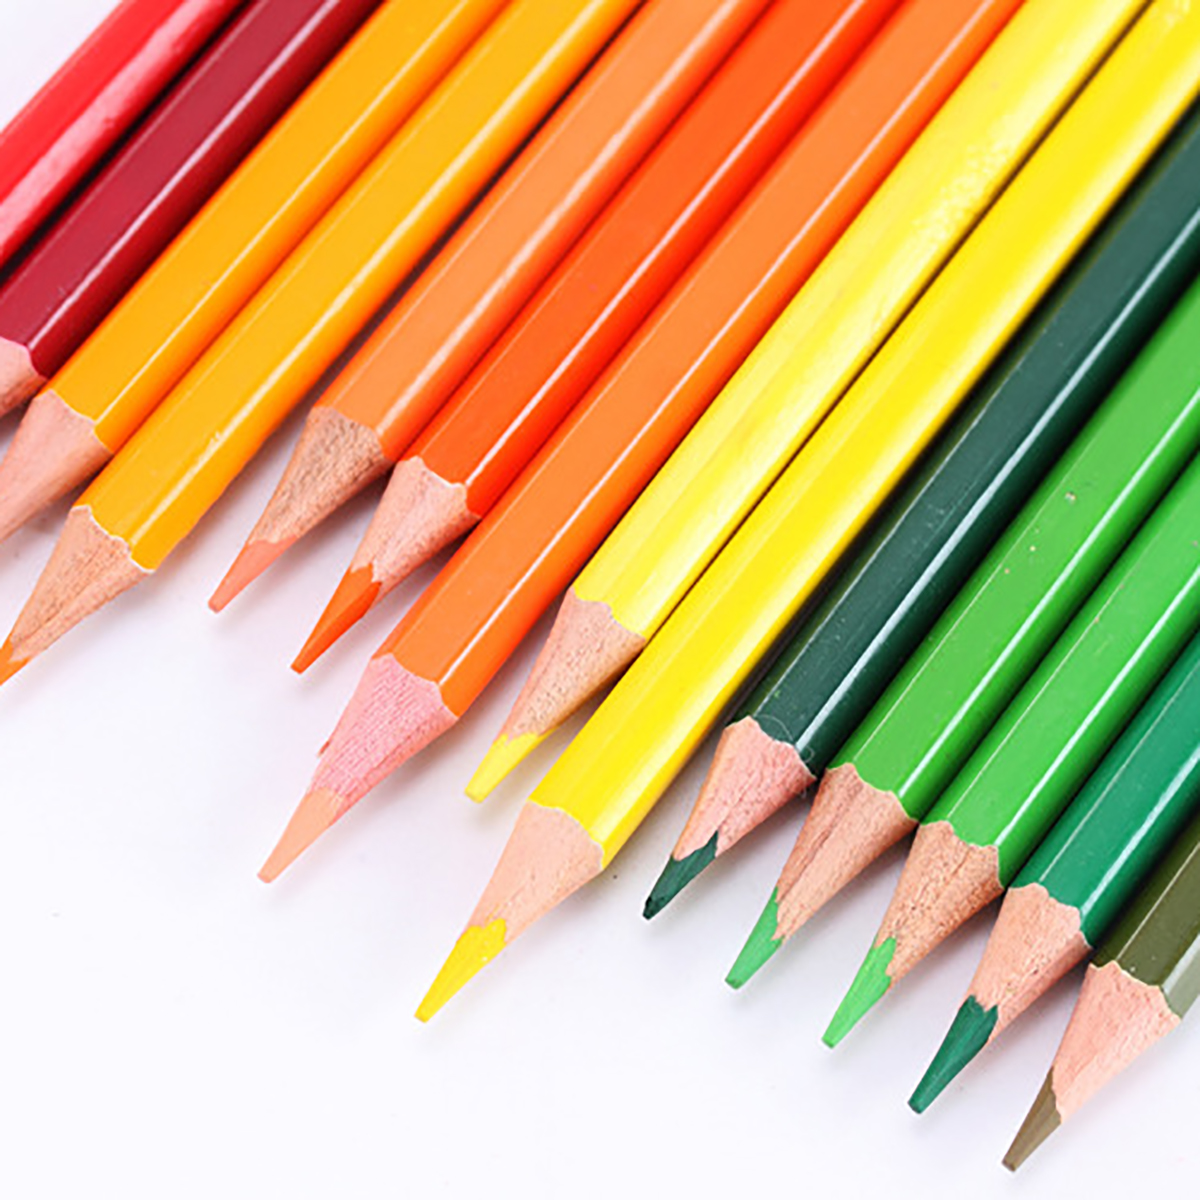 12-Colors-Wood-Color-Pencils-Set-Non-toxic-Artist-Painting-Oil-Pencil-for-School-Office-Drawing-Sket-1742753-6